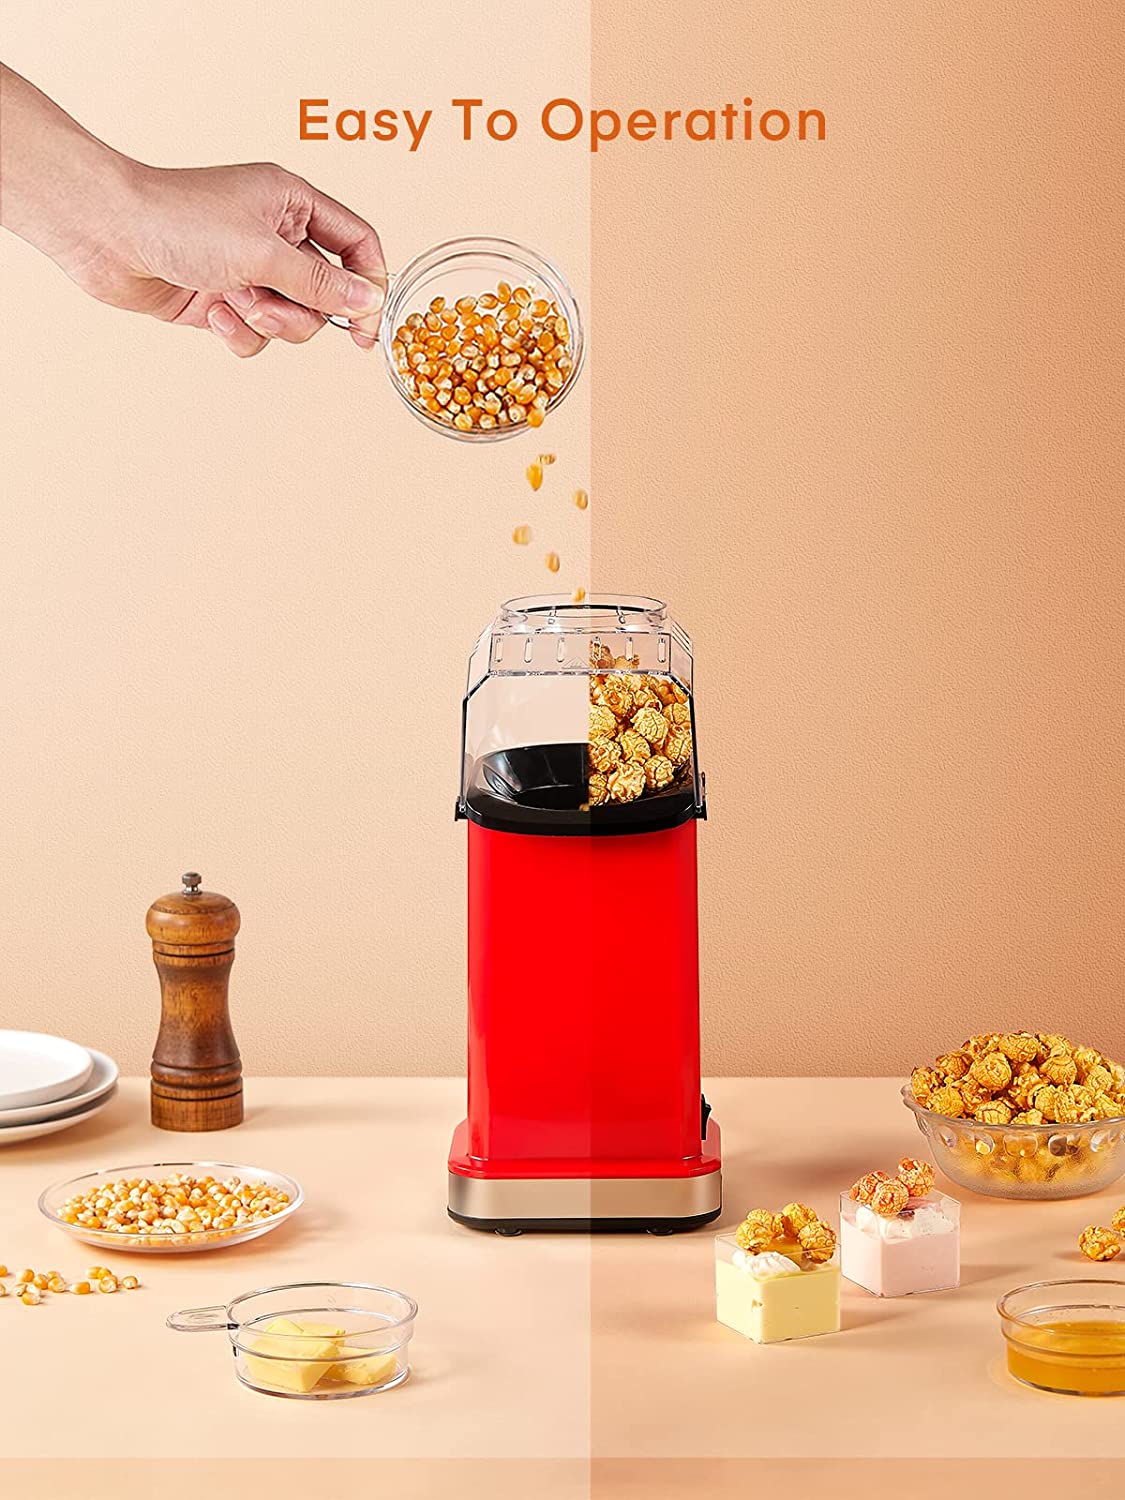 easy to operate, FOHERE 1400W Hot Air Popcorn Maker, 18 Cups/4.5 Quart, Popcorn Popper with Measuring Cup, 2min Fast Popping, Electric Pop Corn Maker, Quick Snack, No Oil Needed